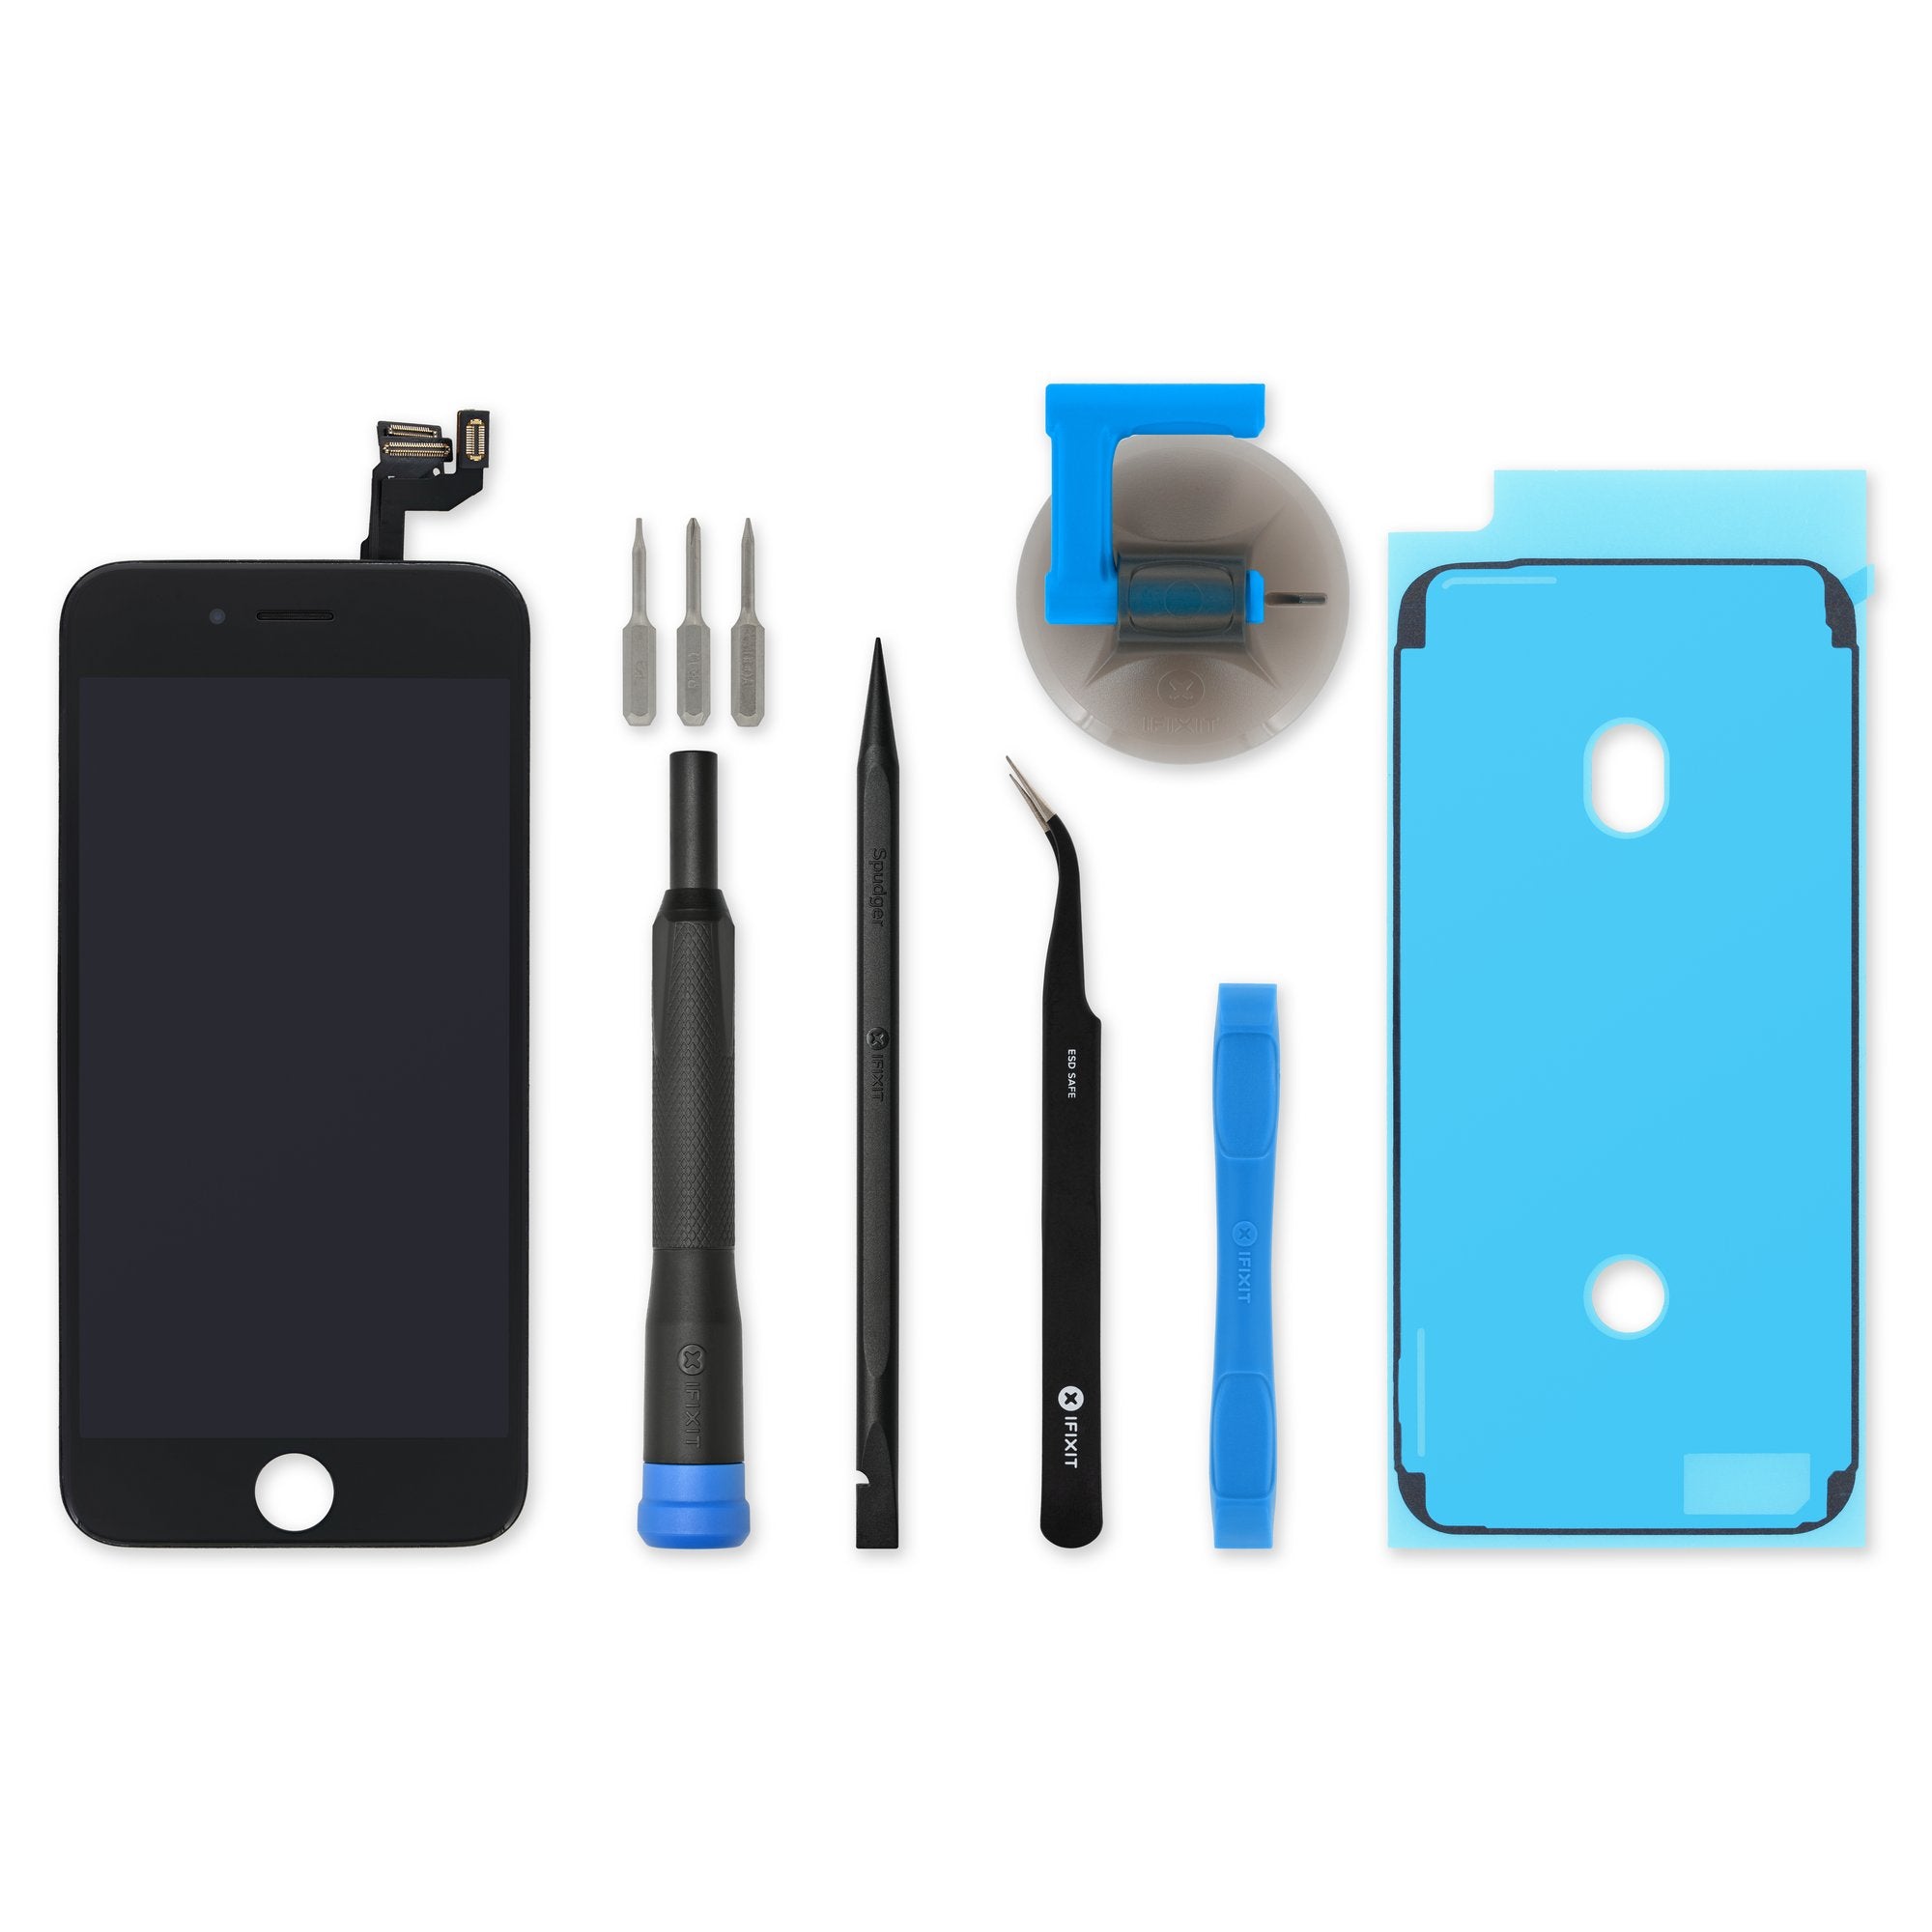 iPhone 6s Screen: LCD and Digitizer Replacement Kit - iFixit